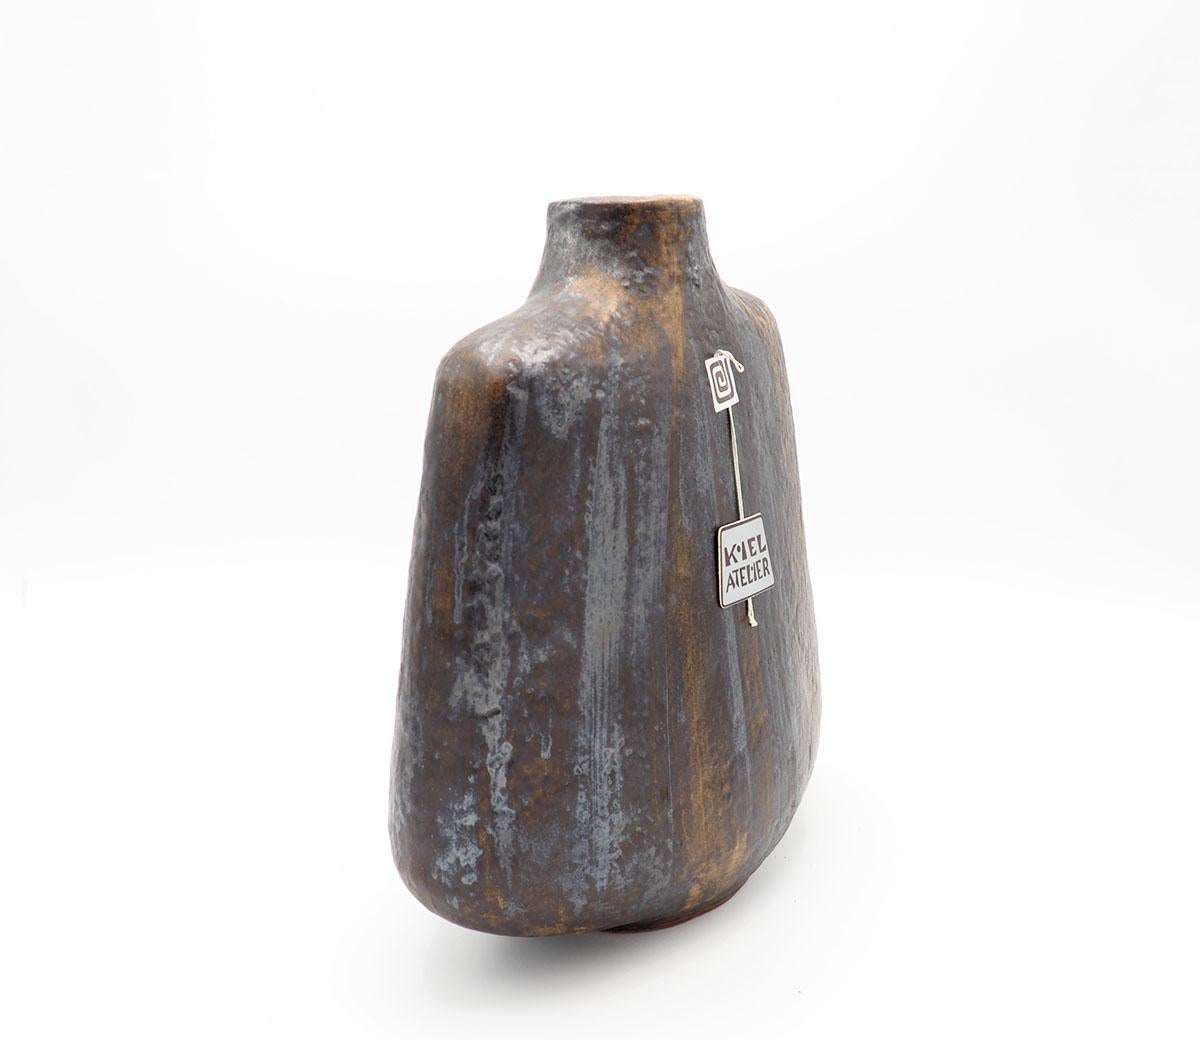 Rare Studio art vase produced by Cartsens Tönnieshof.

The Kiel studio label of Carstens made high-end vases and objects under the direction of Gerda Heuckeroth.

This vase is also called the shoulder vase due to its shape.

and was produced in the